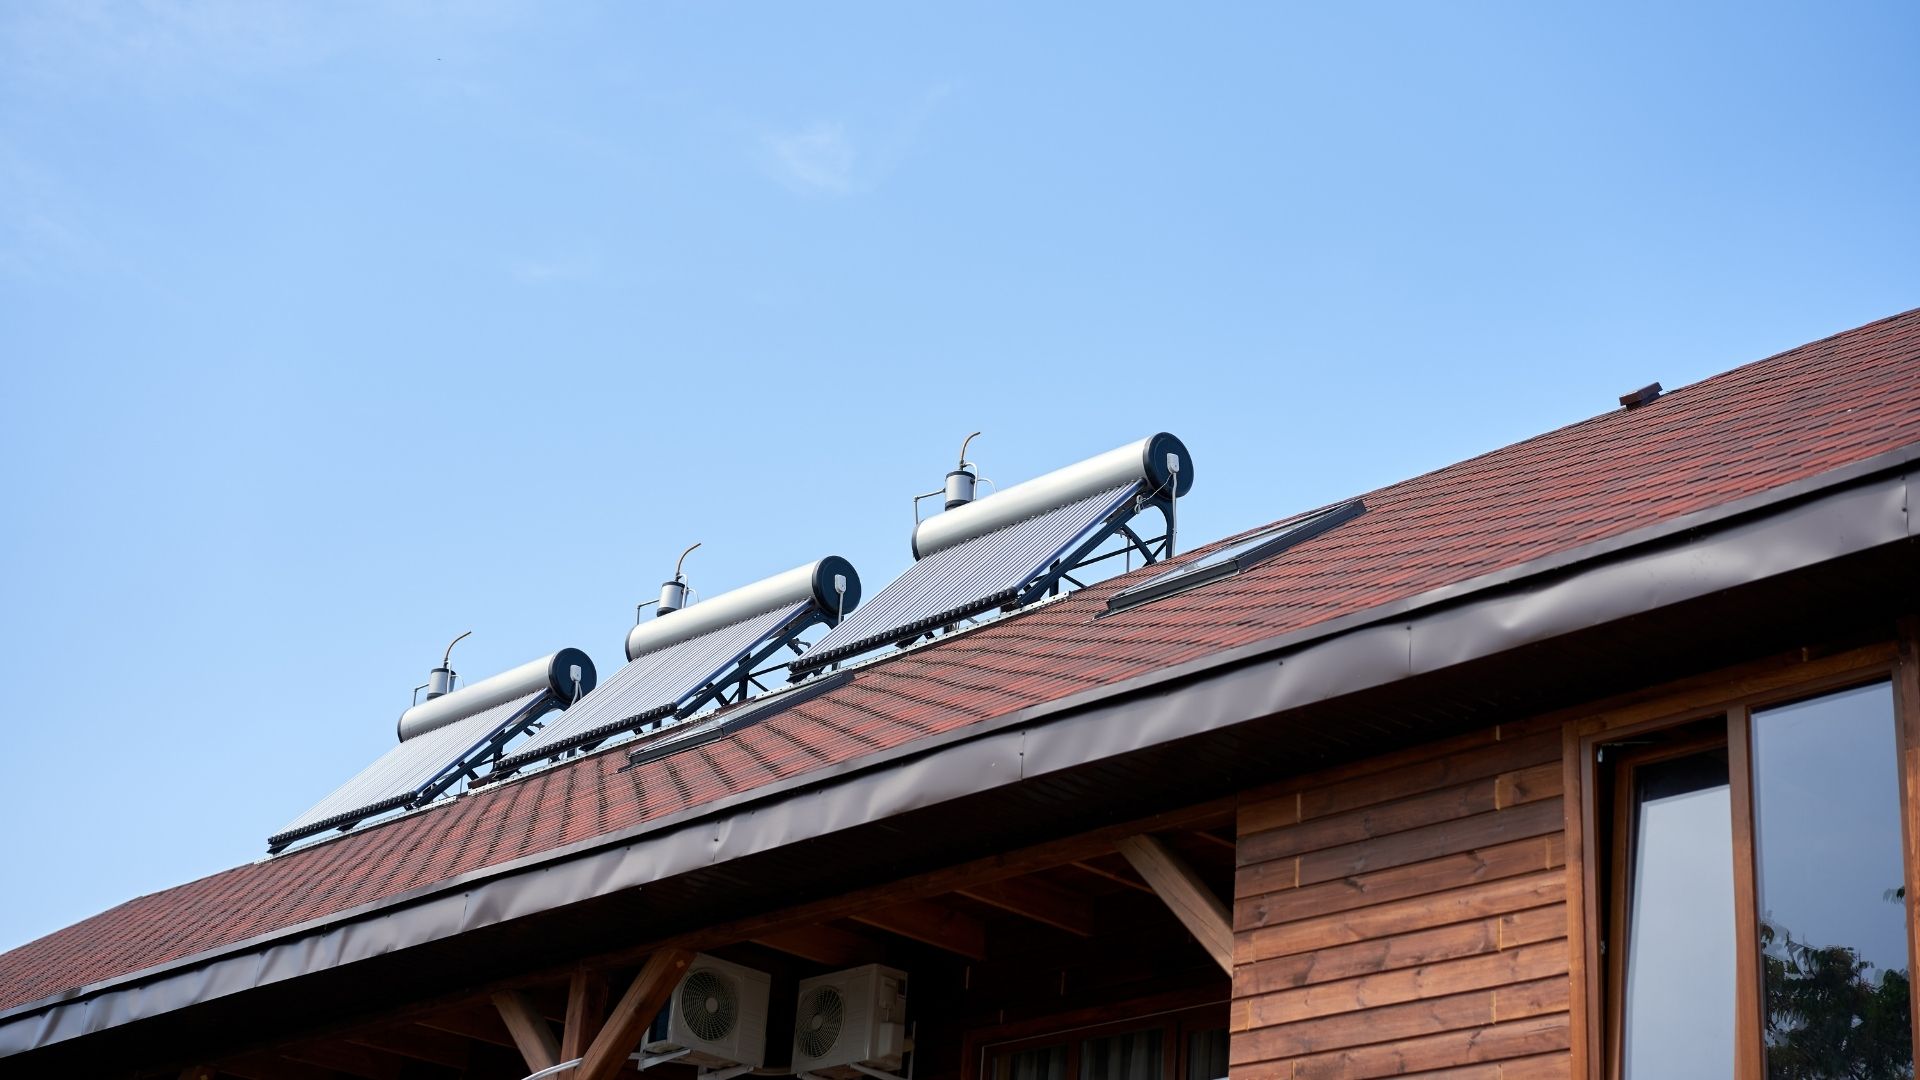 How should you choose the solar system for your home